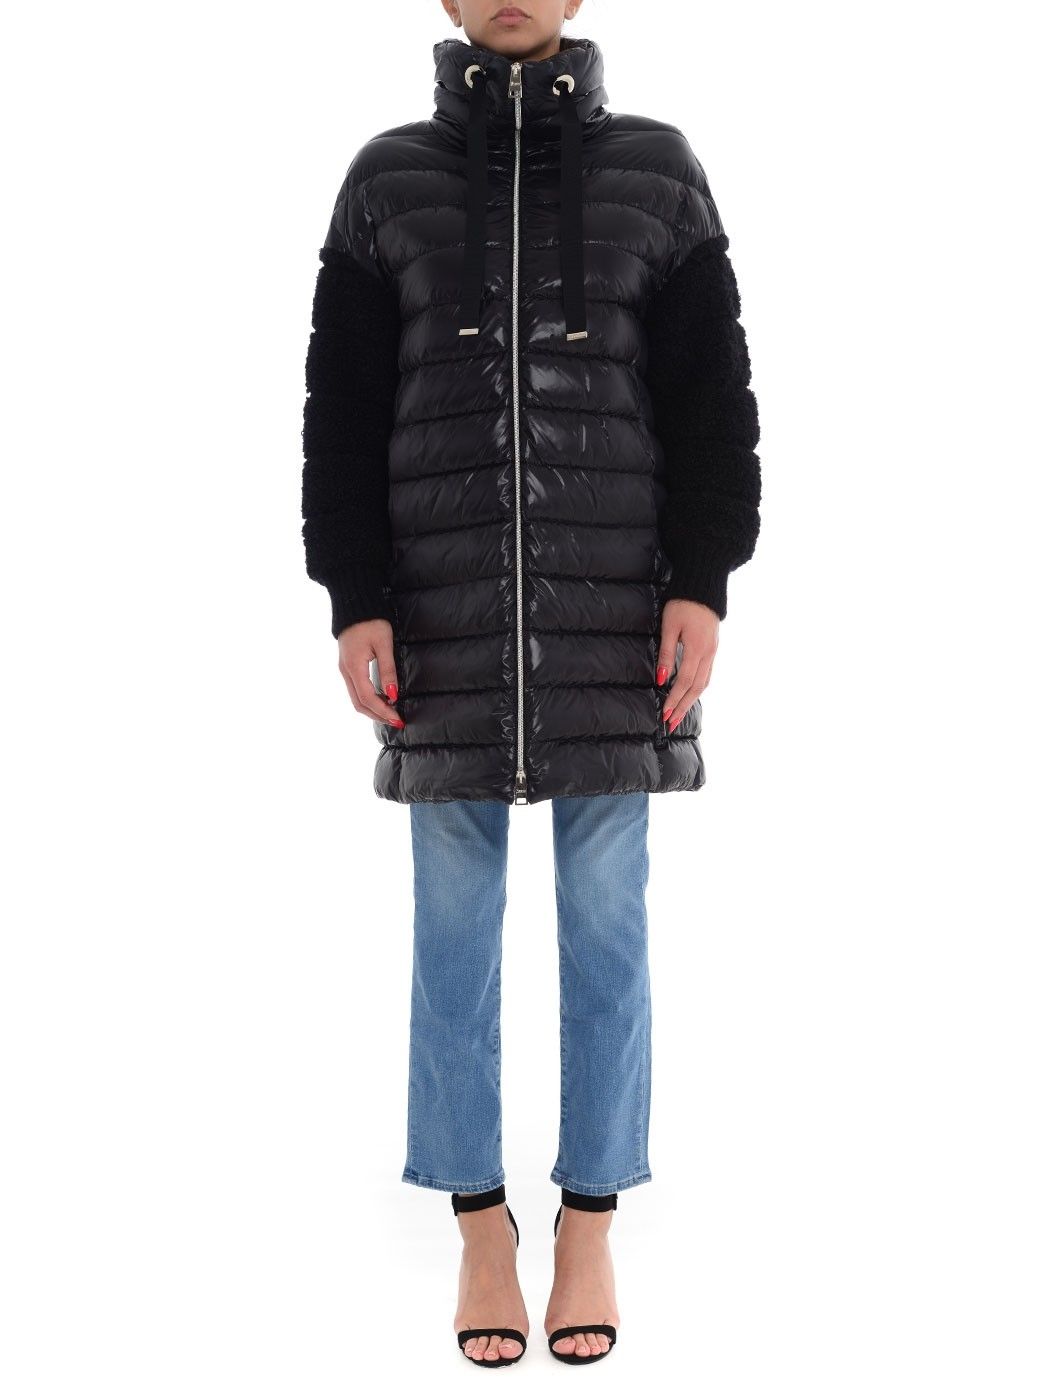  down jackets,removable hoods,WOMEN DOWN JACKETS,MONCLER PADDED JACKETS,WOOLRICH ARCTIC PARKA,HERNO DOWN JACKETS  HERNO PI00088DR-12017